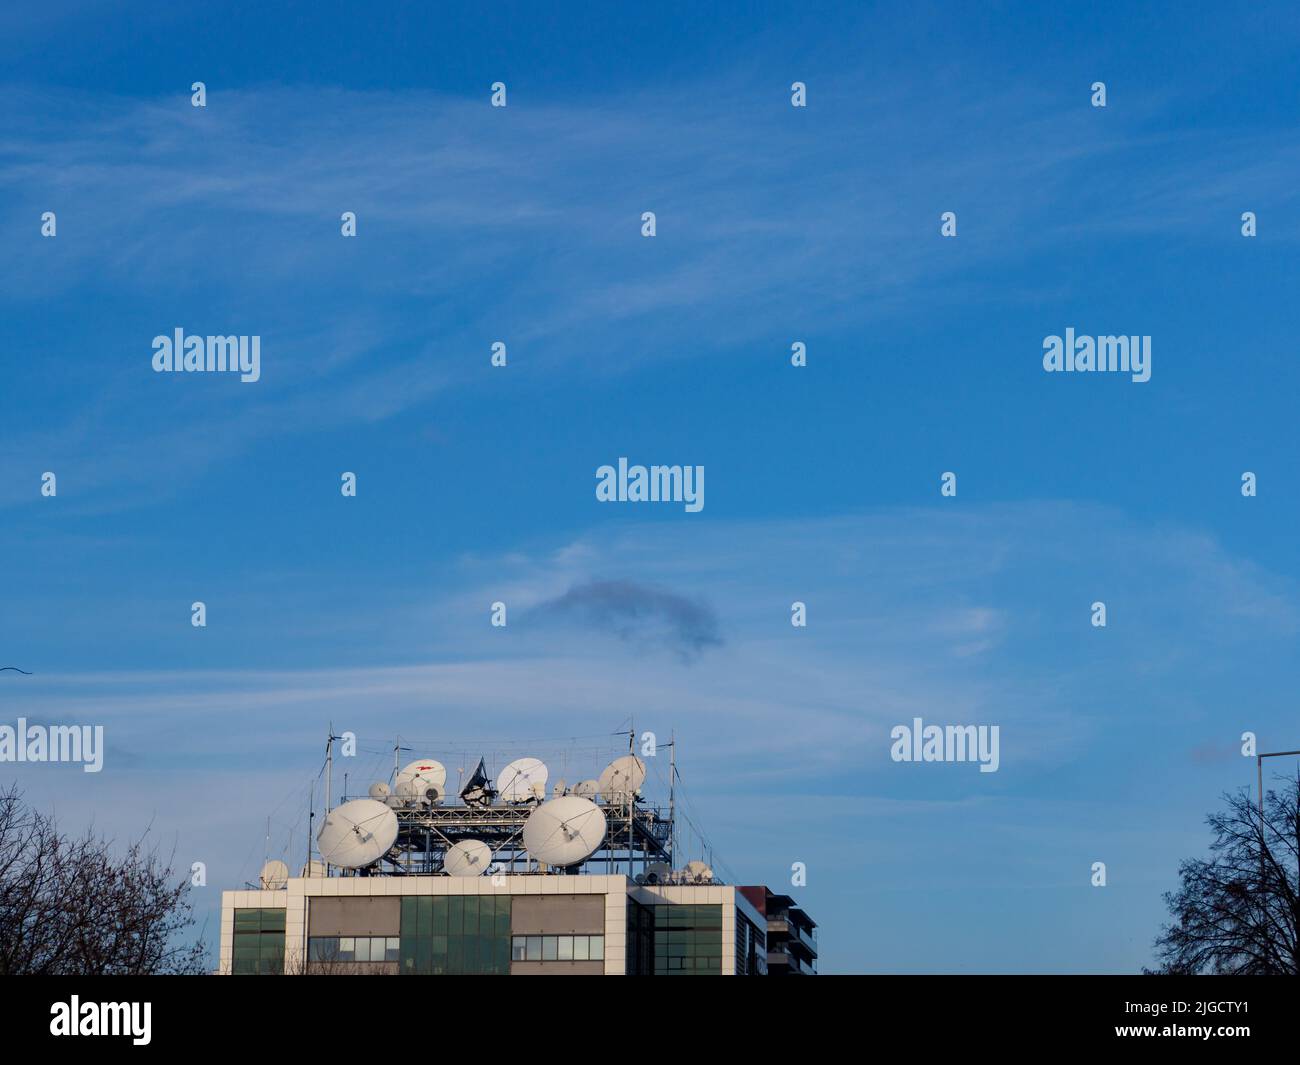 Satellite dishes against the background of blue sky Stock Photo